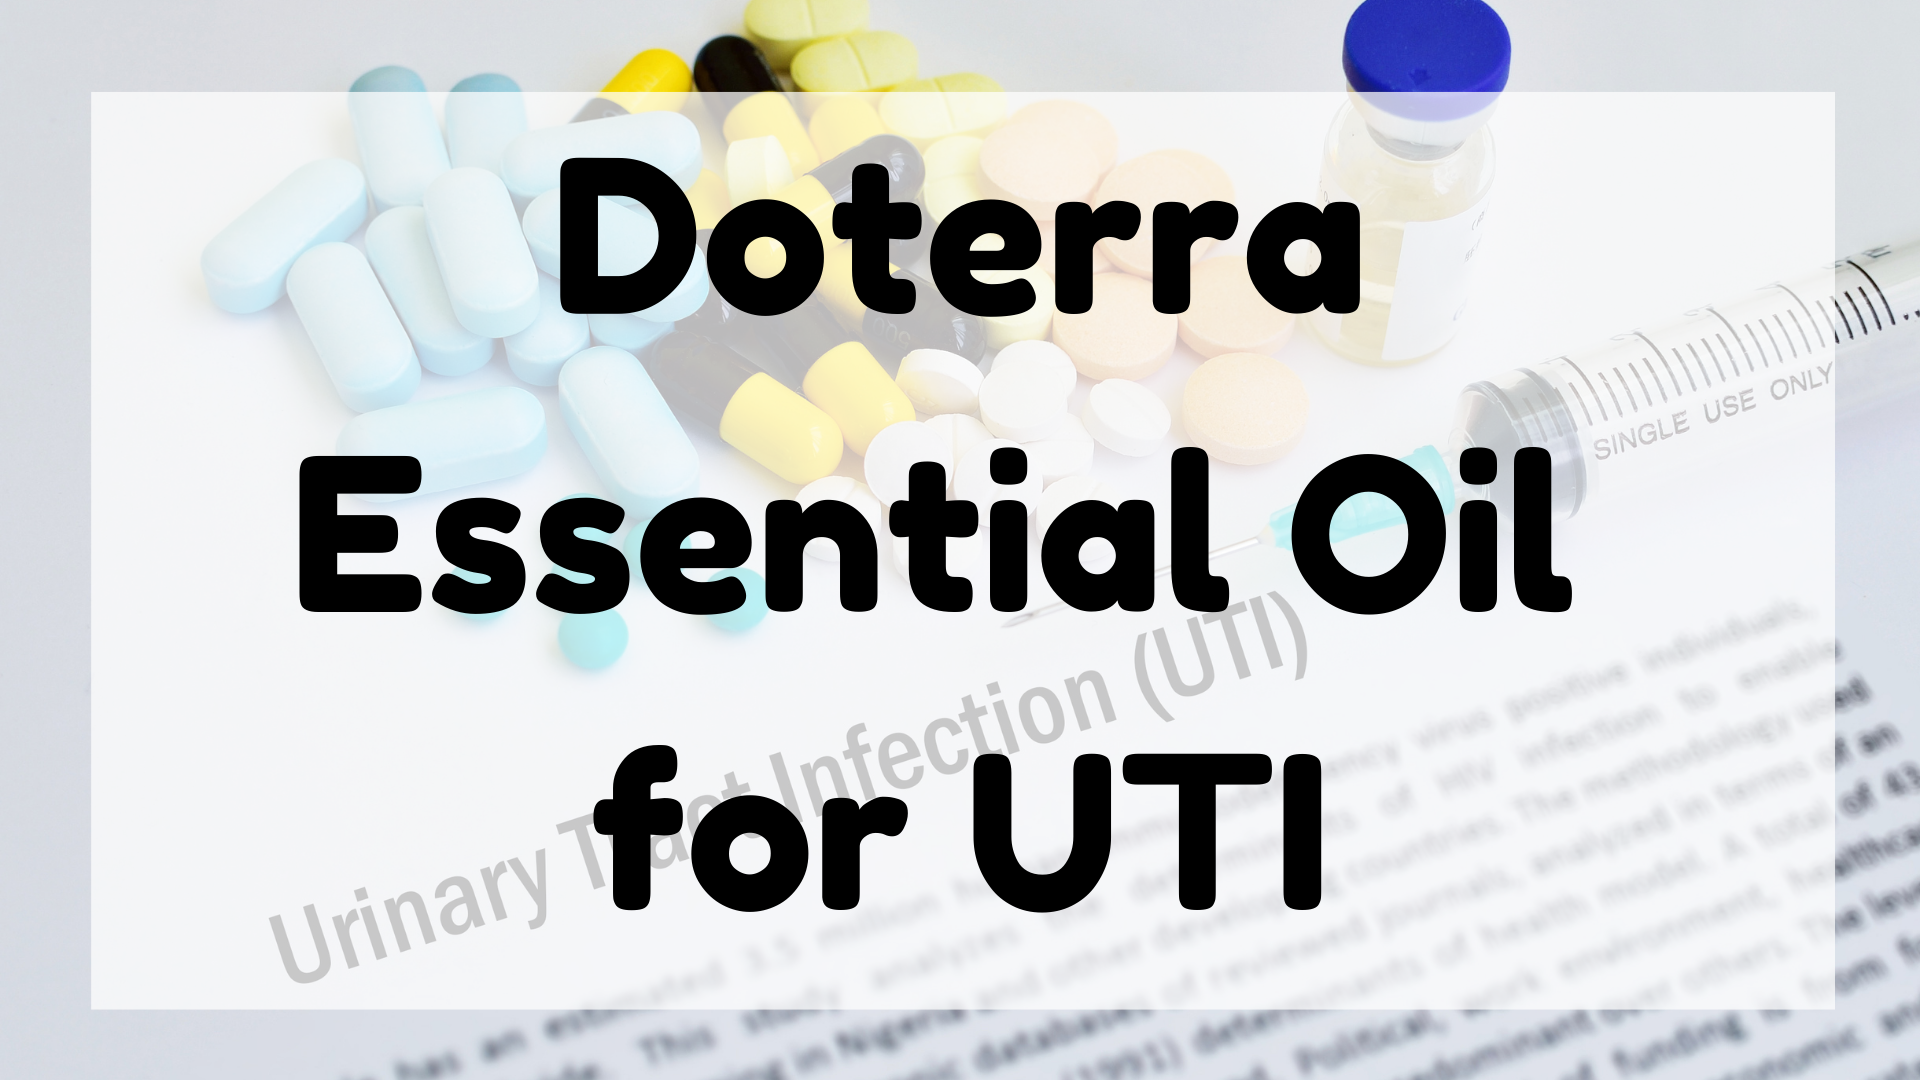 Doterra Essential Oil for Uti featured image